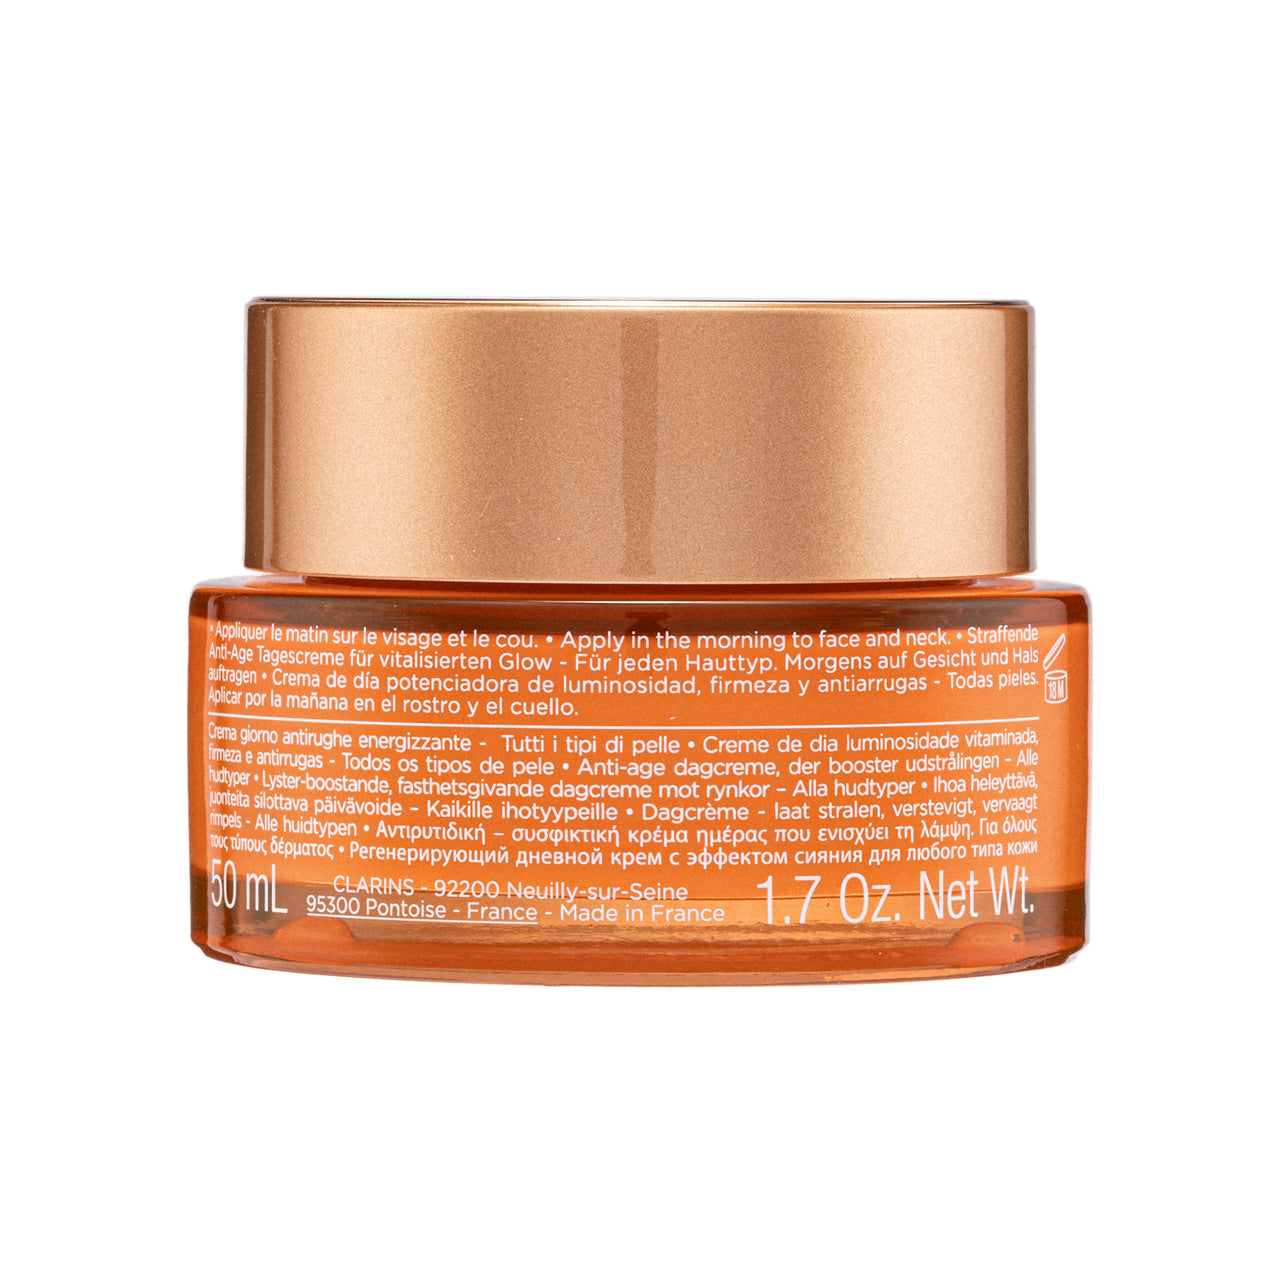 Clarins Extra-Firming Energy Day Cream 50ML